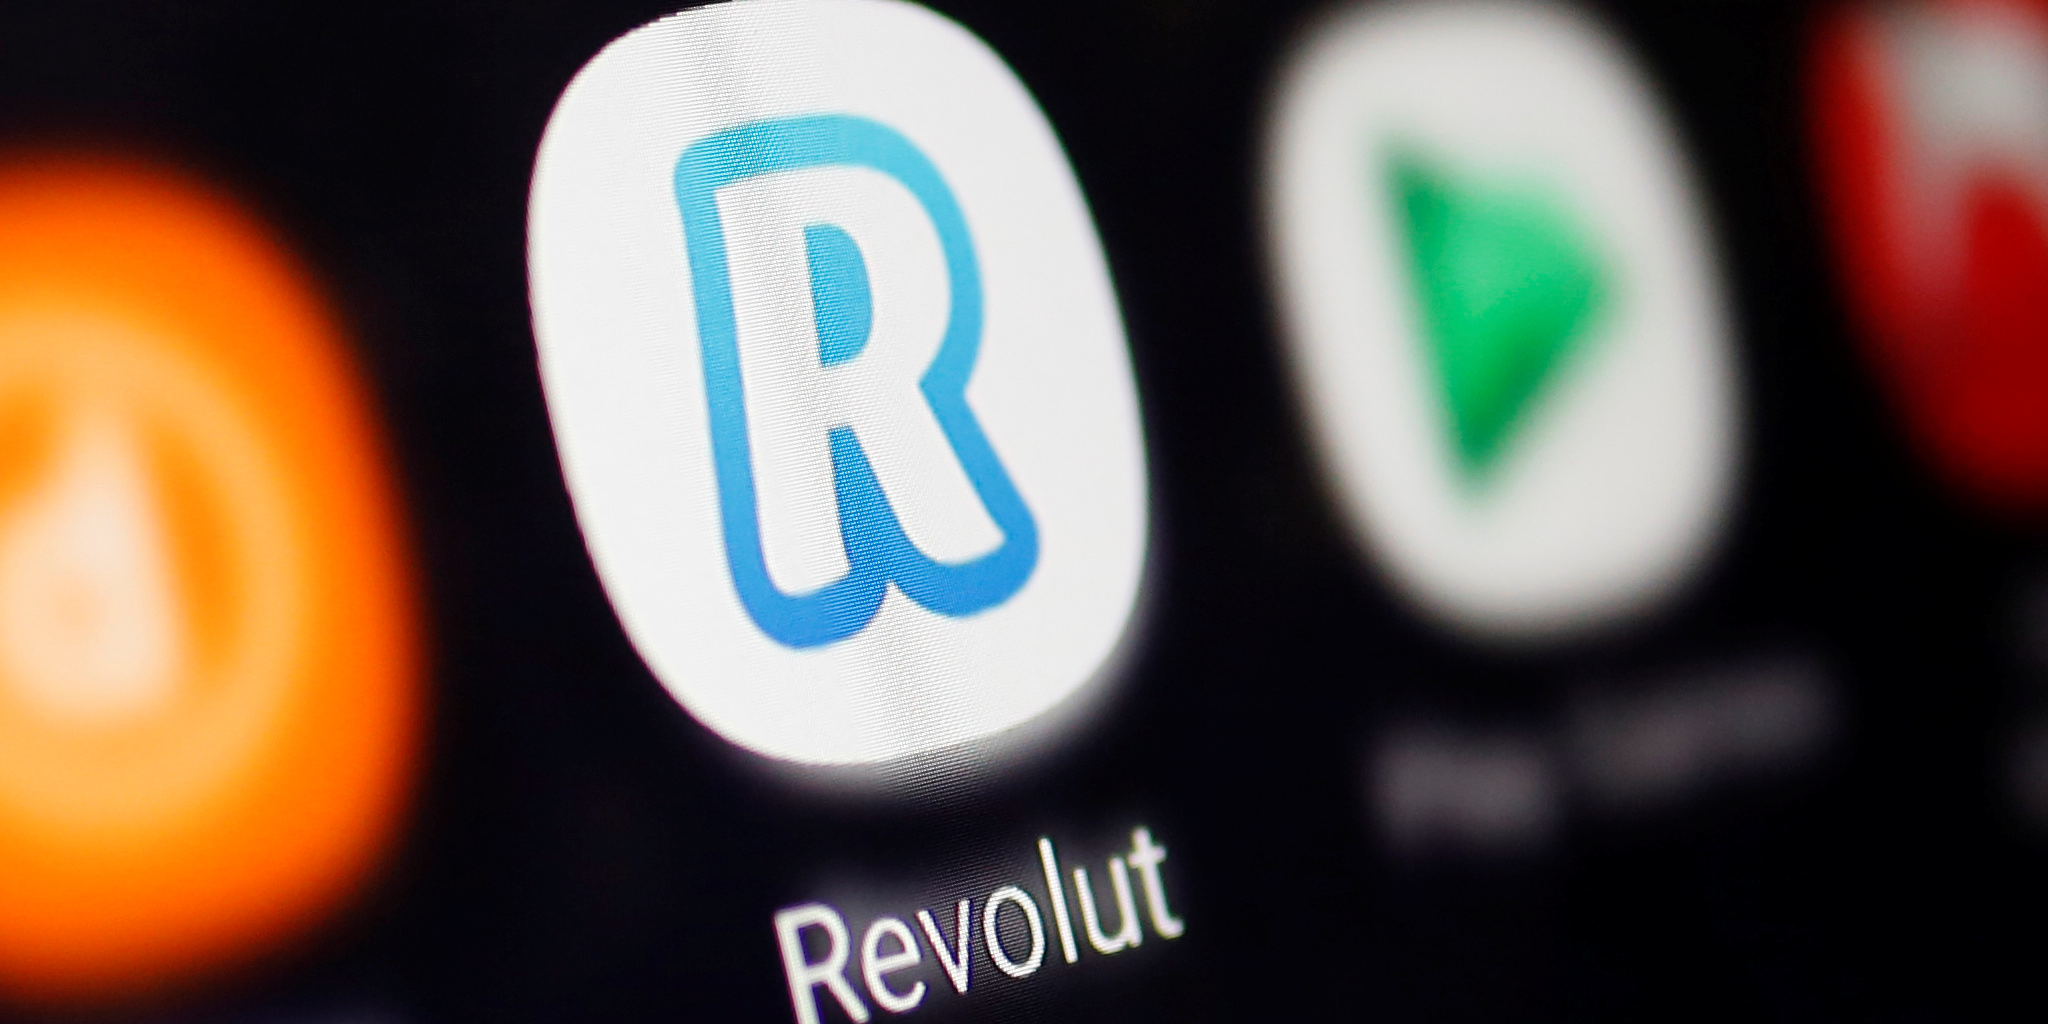 FILE PHOTO: A Revolut logo is seen in this illustration taken January 6, 2020. REUTERS/Dado Ruvic/Illustration